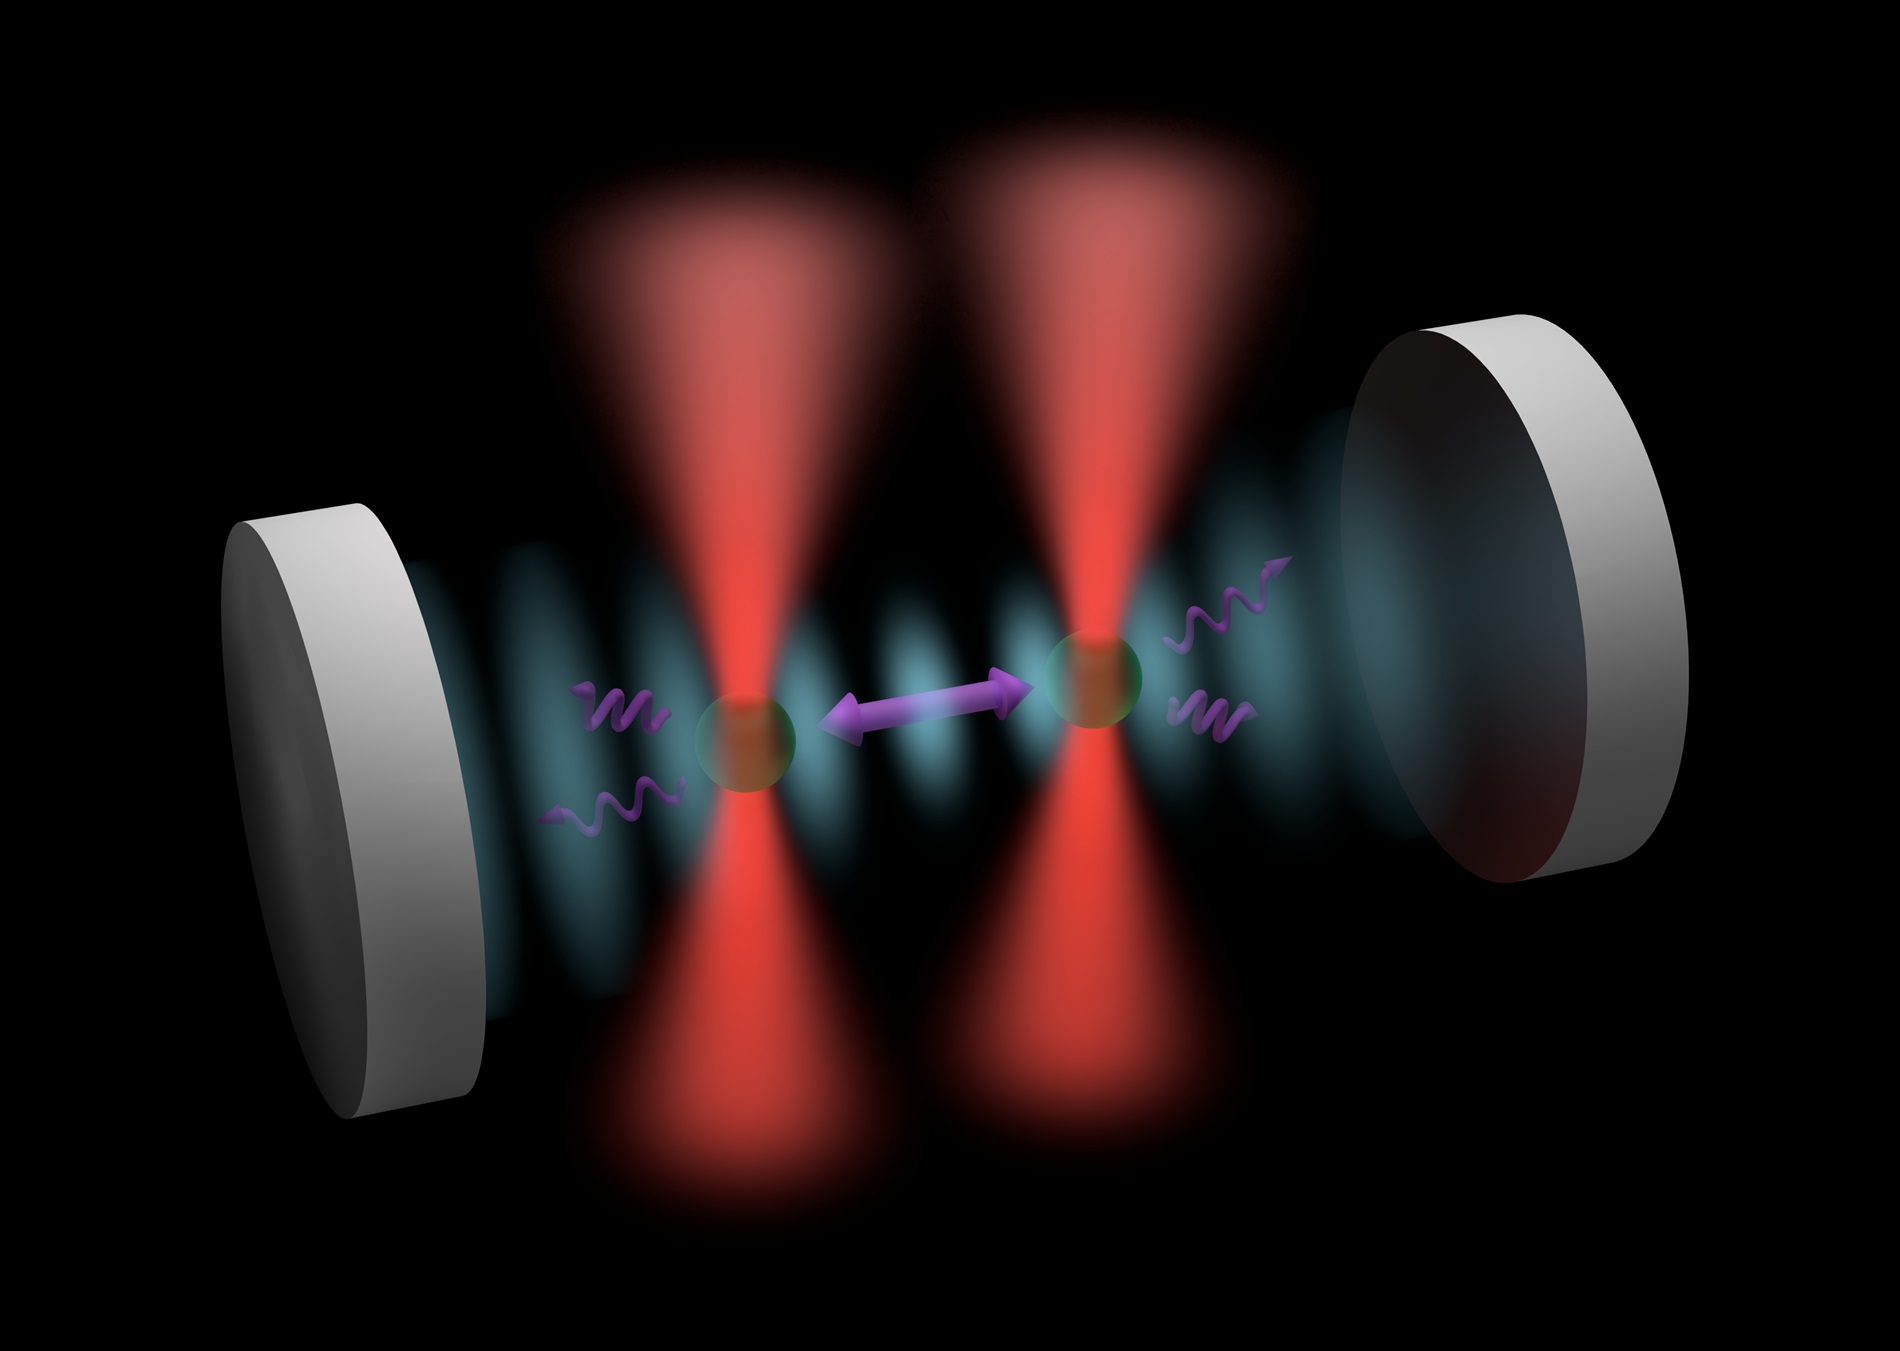 Two optically trapped nanoparticles are coupled together by photons bouncing back and forth between mirrors